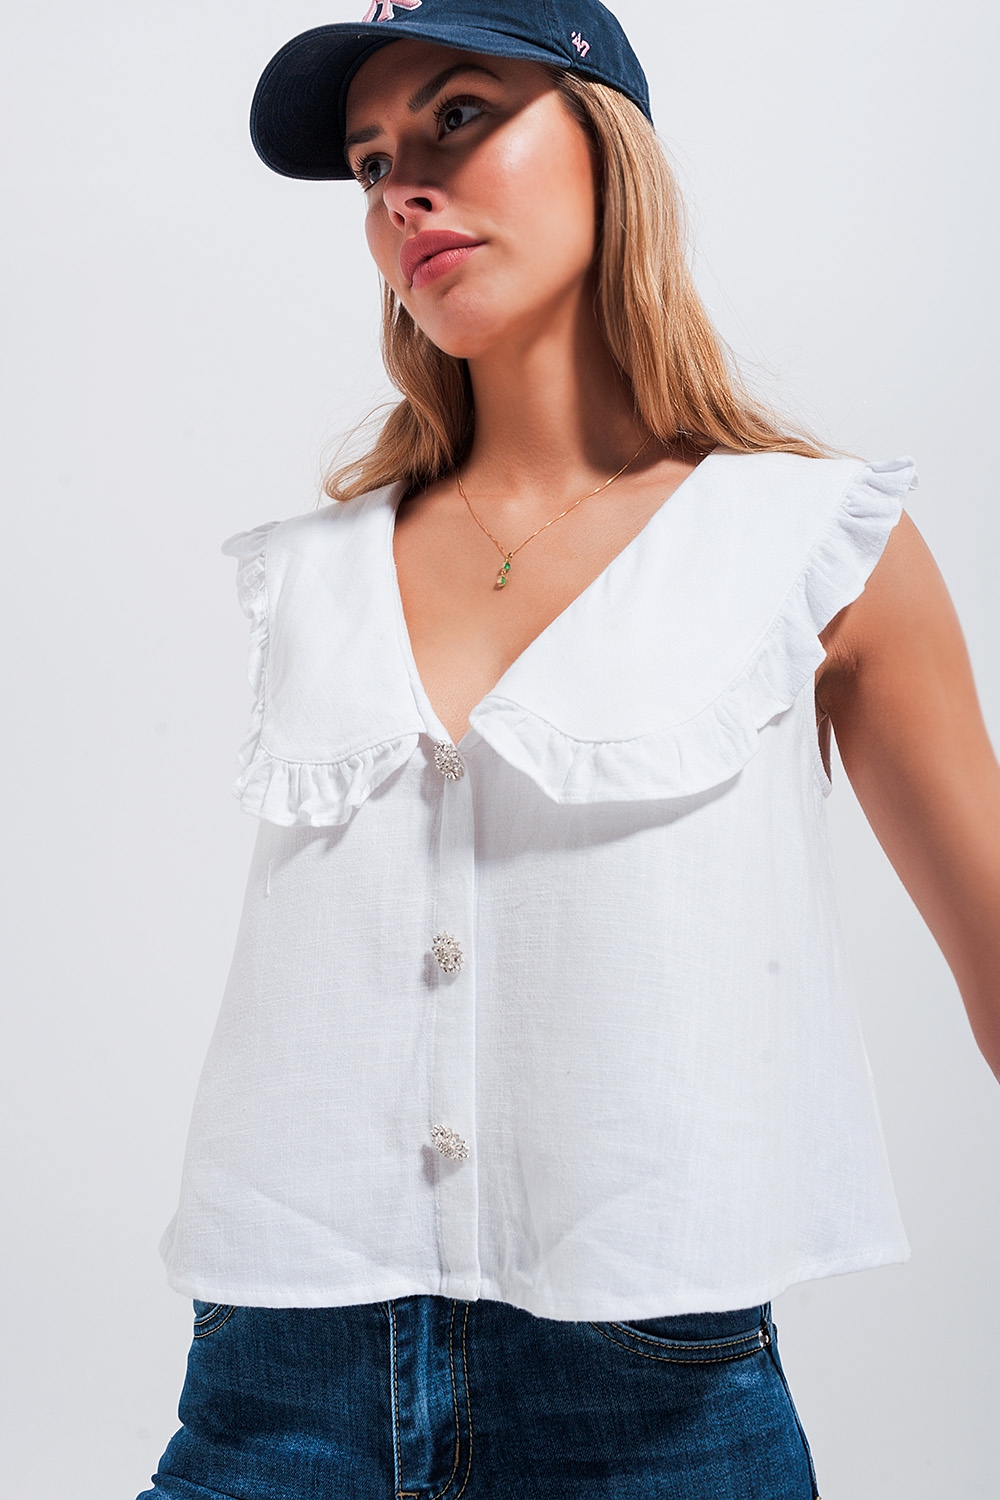 Crop top with bib collar in white